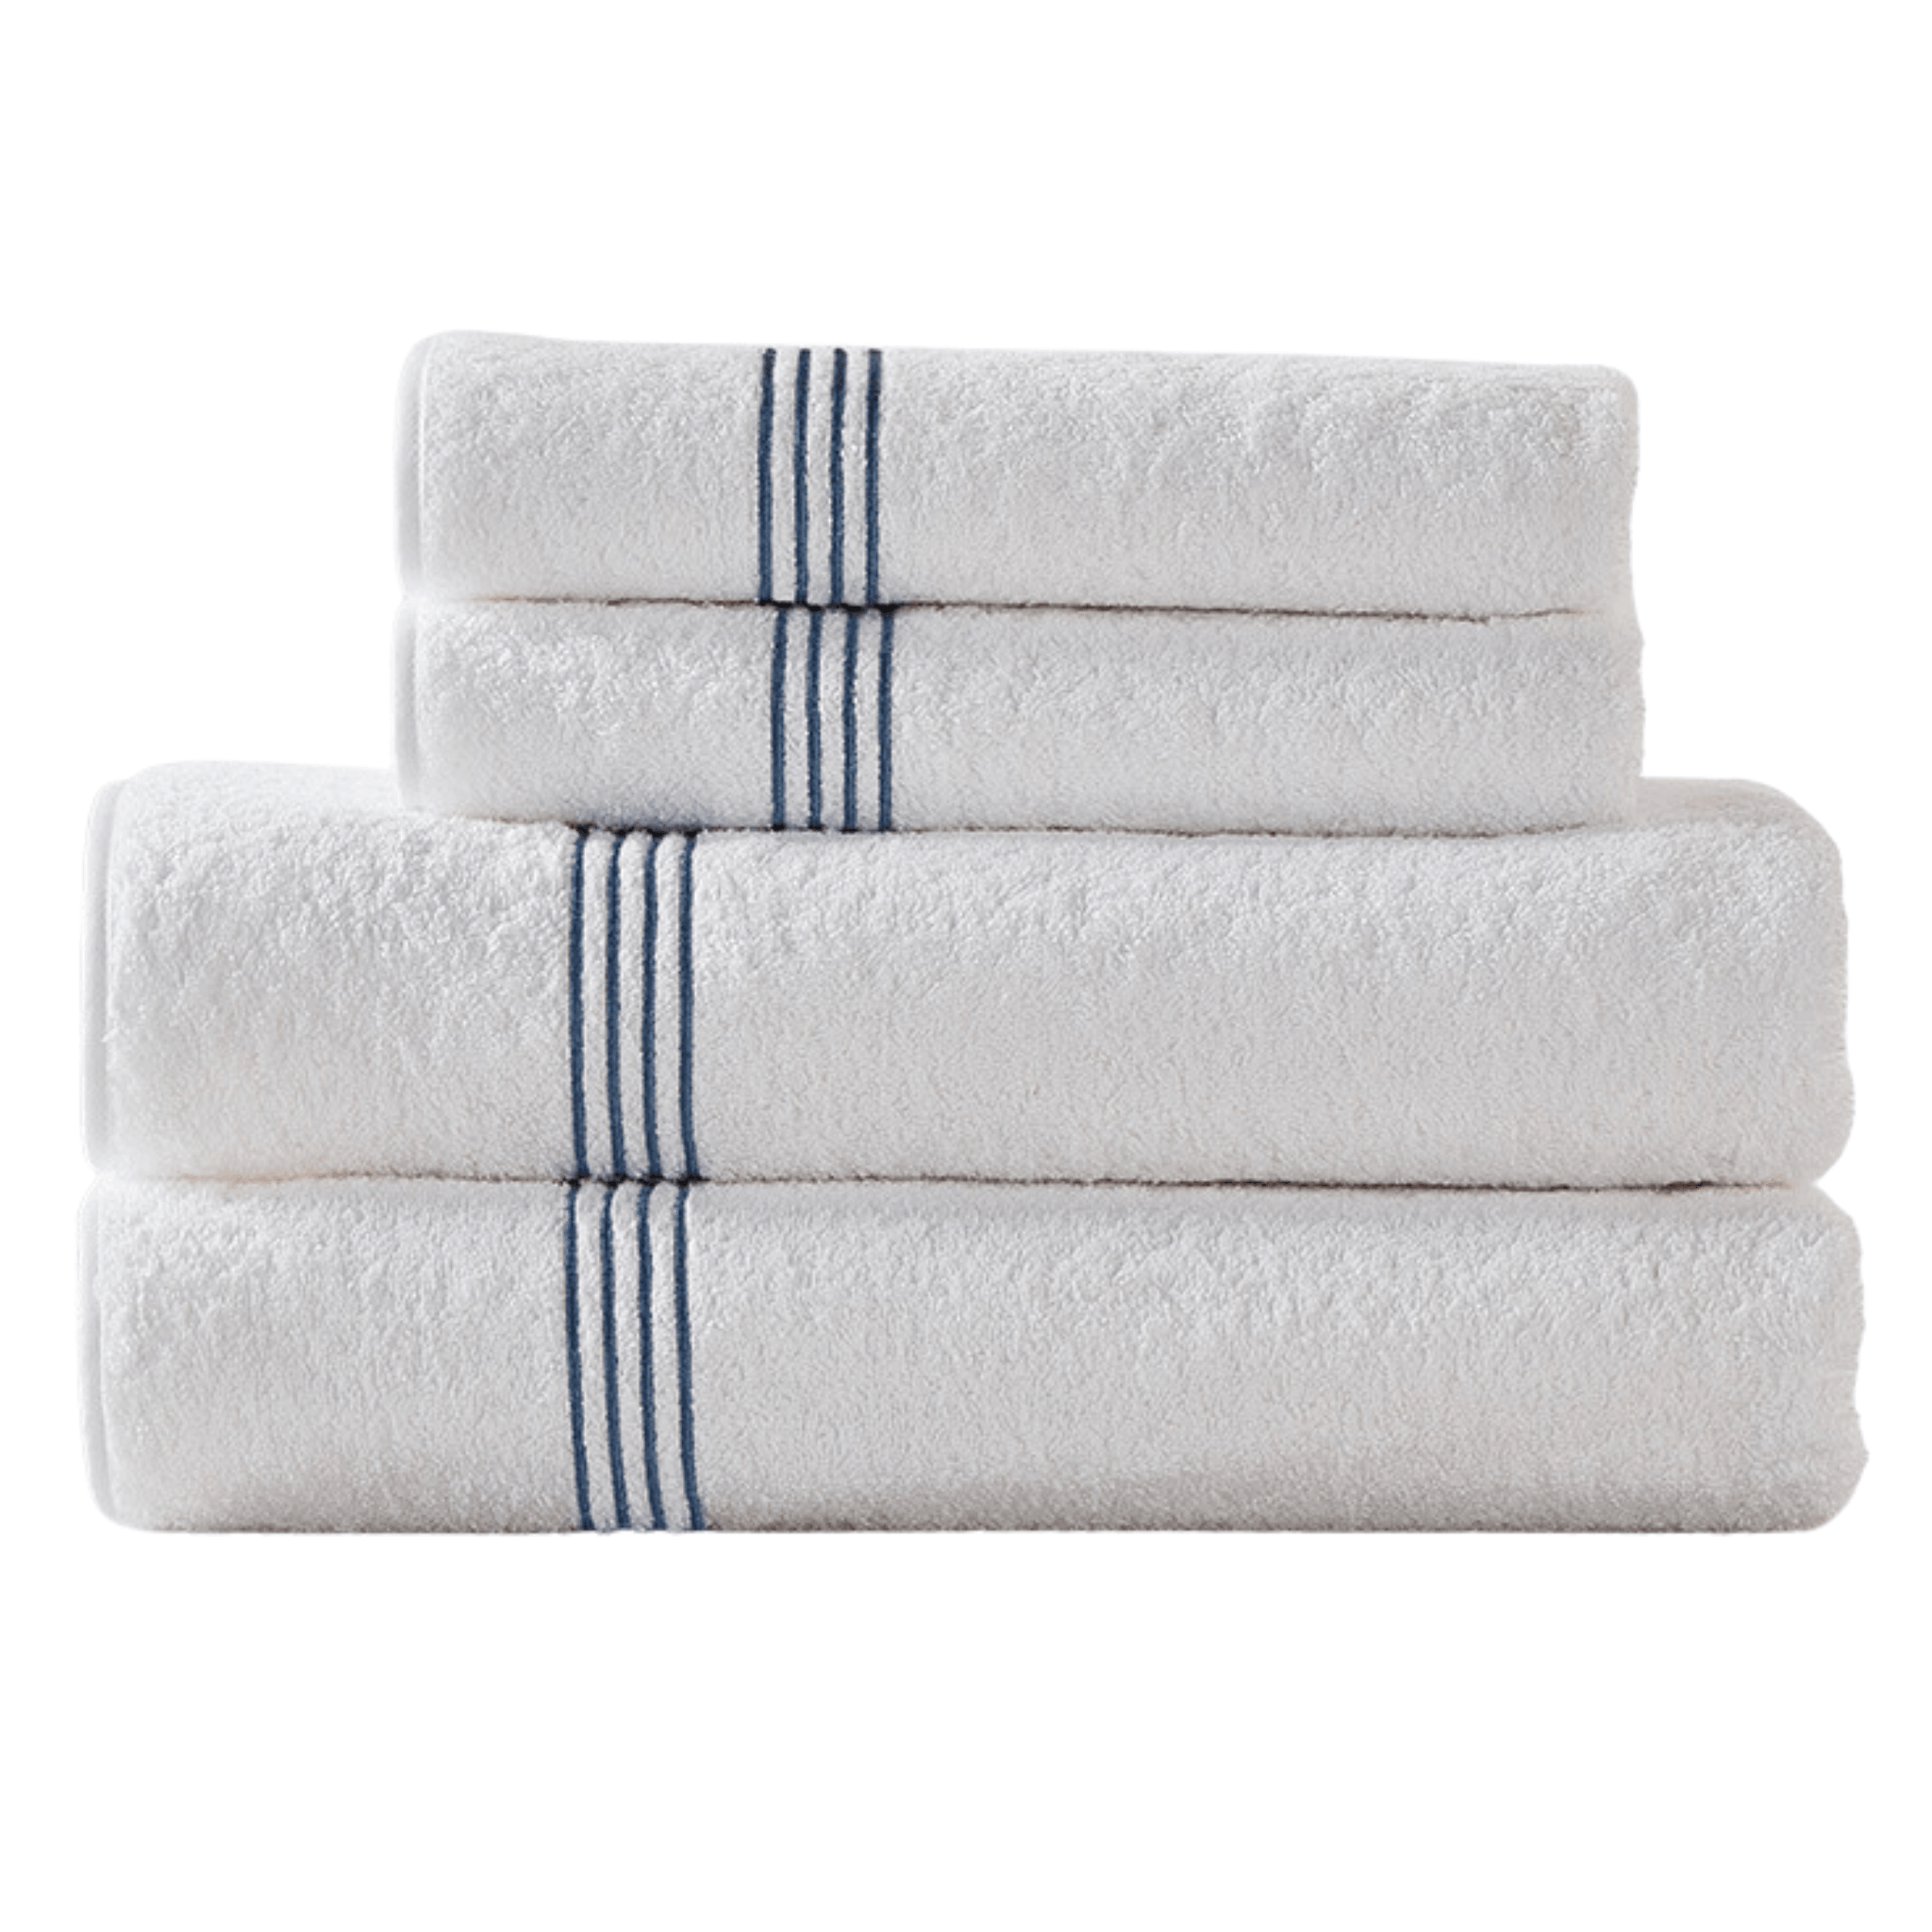 https://www.wellappointedhouse.com/cdn/shop/files/winston-cotton-terry-bath-towels-bath-towels-the-well-appointed-house-1_f712adb2-5643-45c7-b728-e199c78911ab.png?v=1691688137